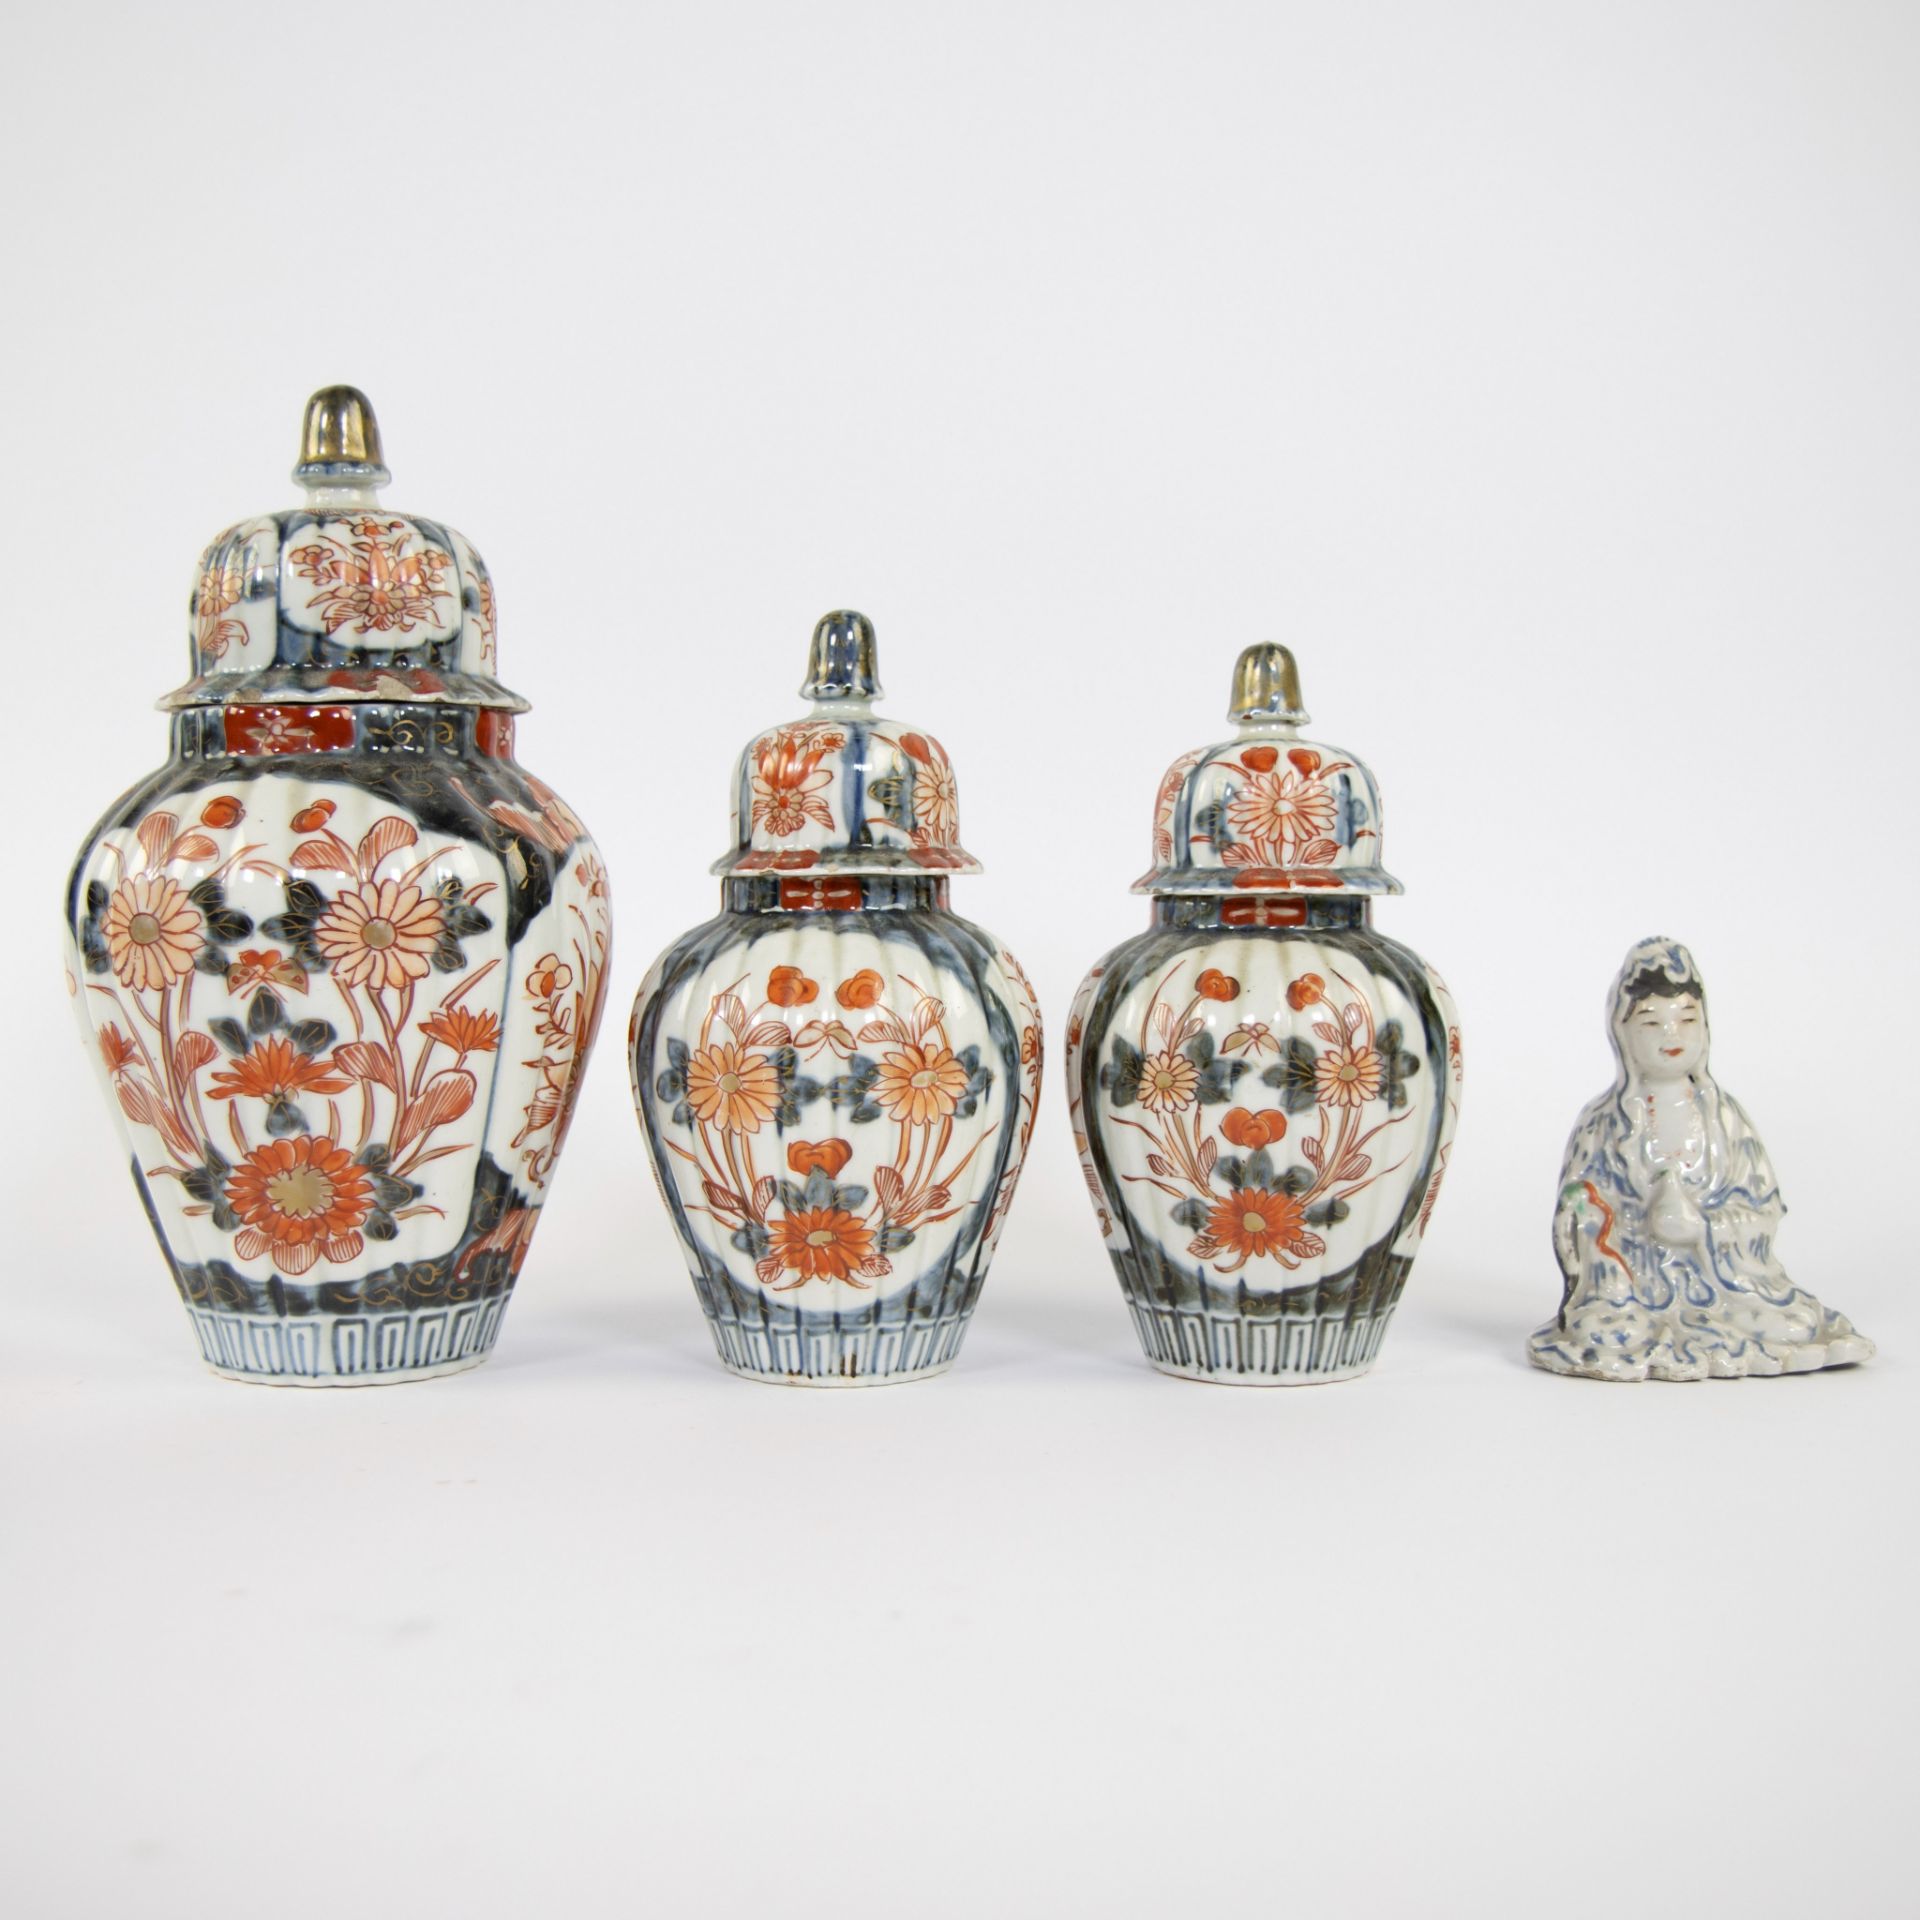 Lot Japanese porcelain 18th/19th century and Japanese 19th century Kannon figurine - Image 2 of 8